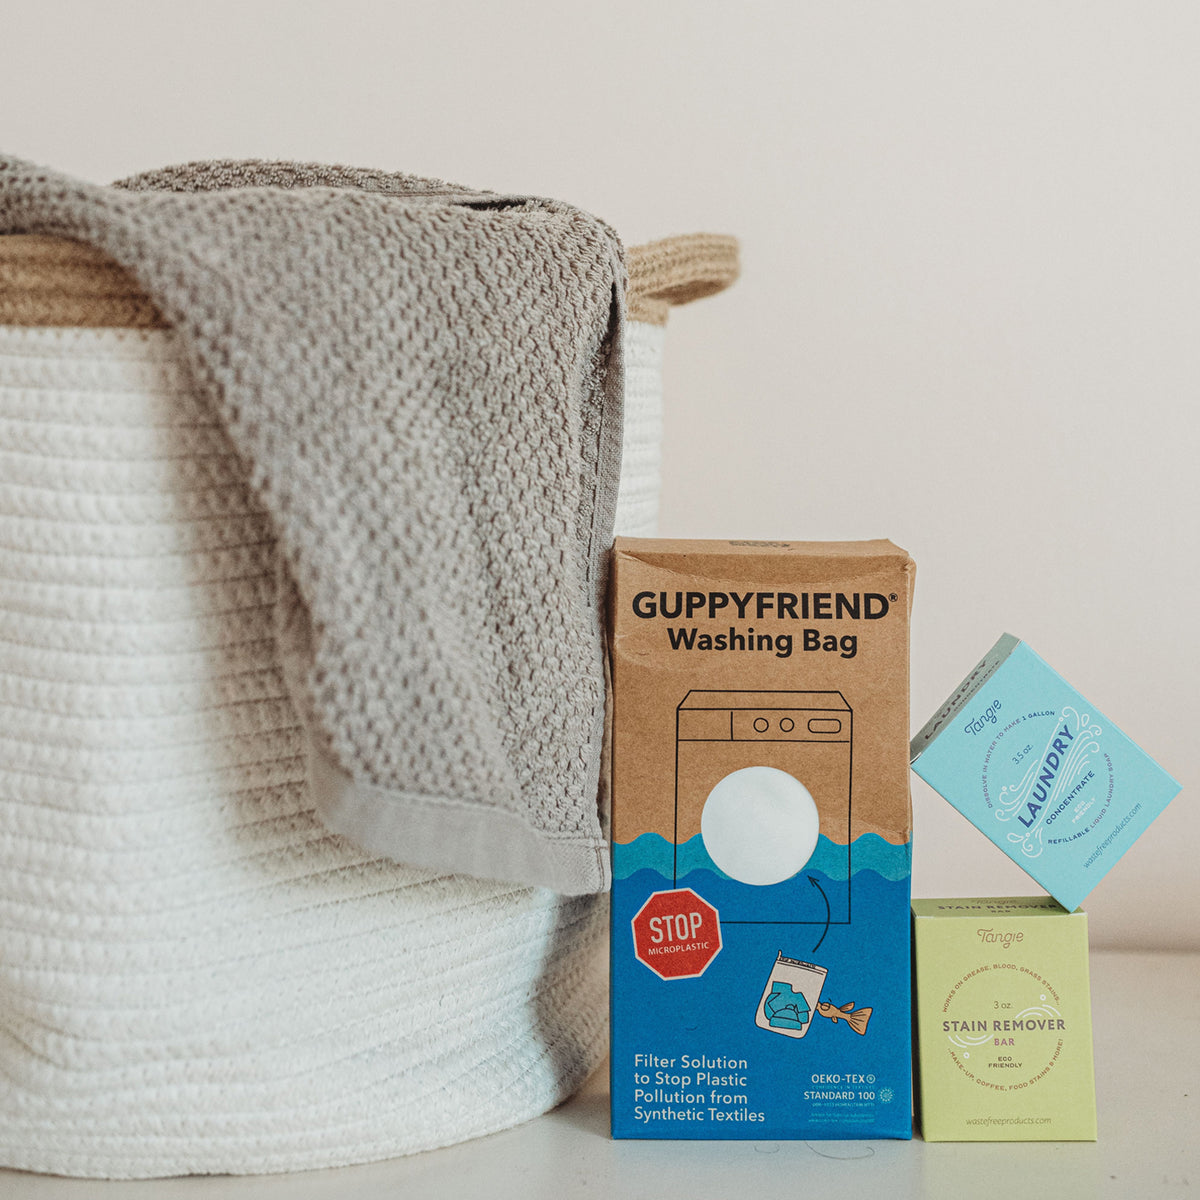 A boxed Guppyfriend Washing Bag, a boxed stain remover bag, and a boxed laundry concetrate next to a cloth laundry hamper with a gray towel hanging over the side